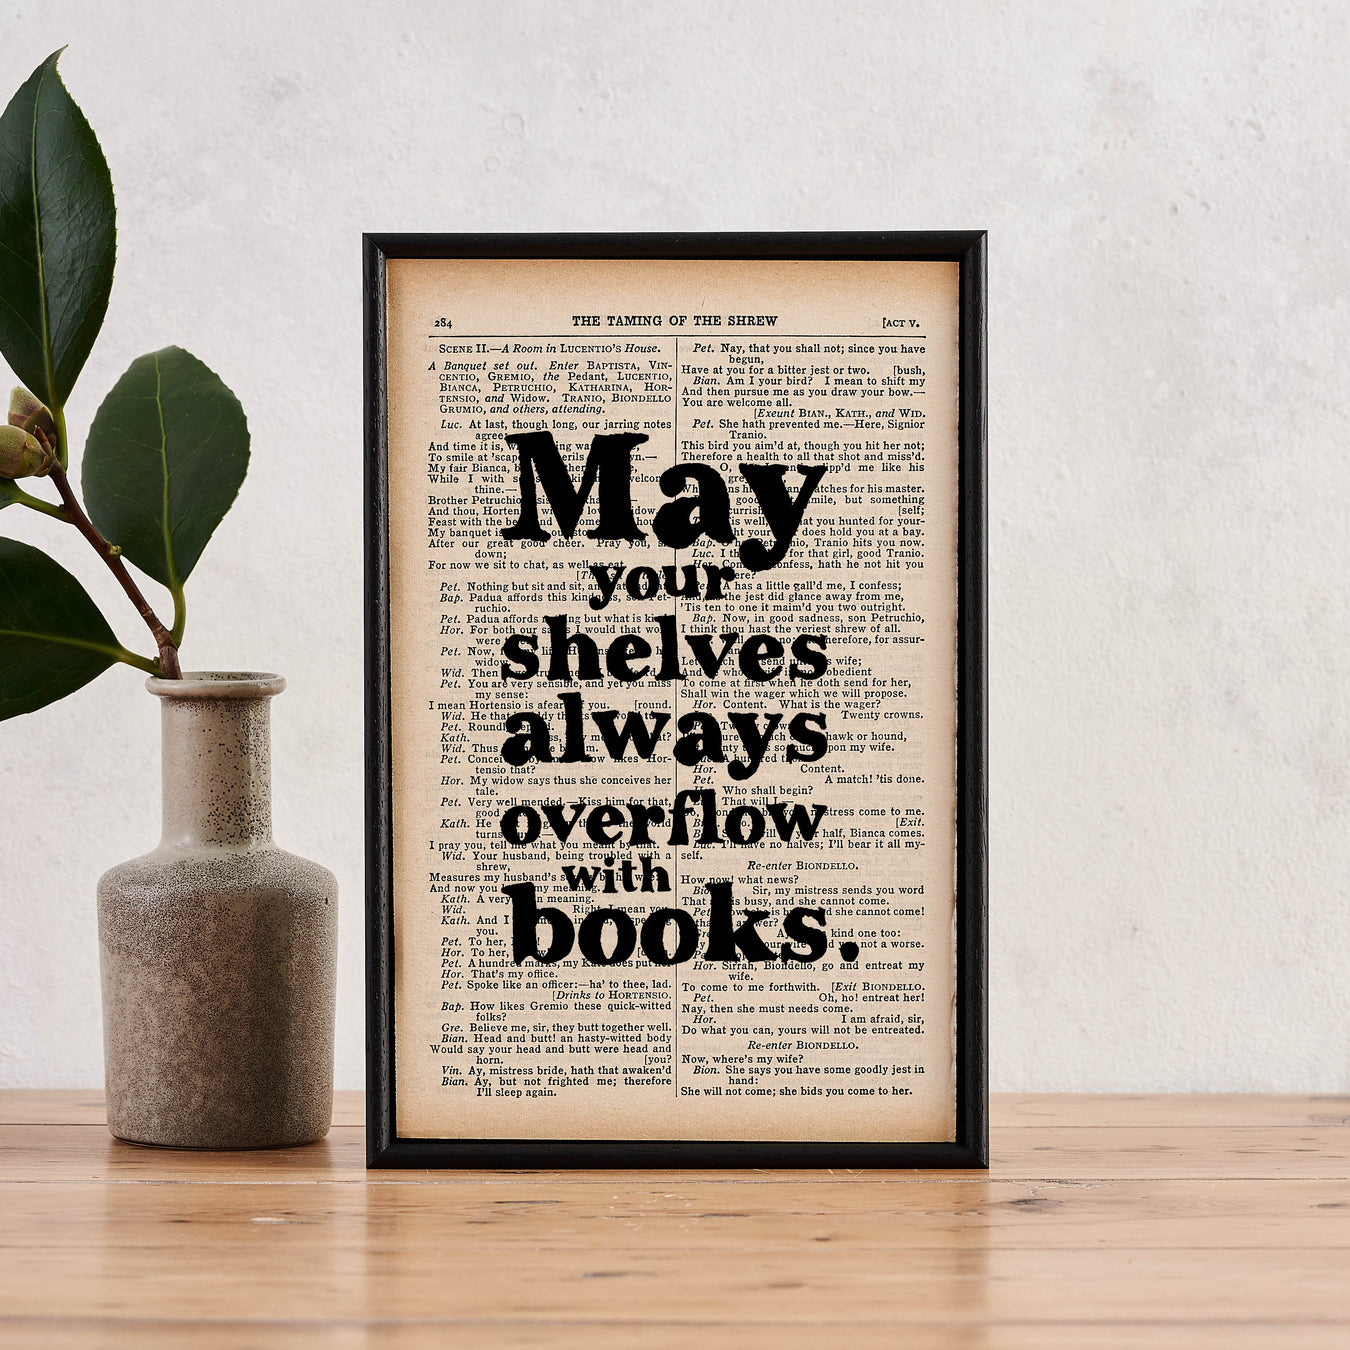 Bookishly's framed book page art collection with famous quotes from literature. Perfect for book lovers, bookworms, bibliophiles and readers.